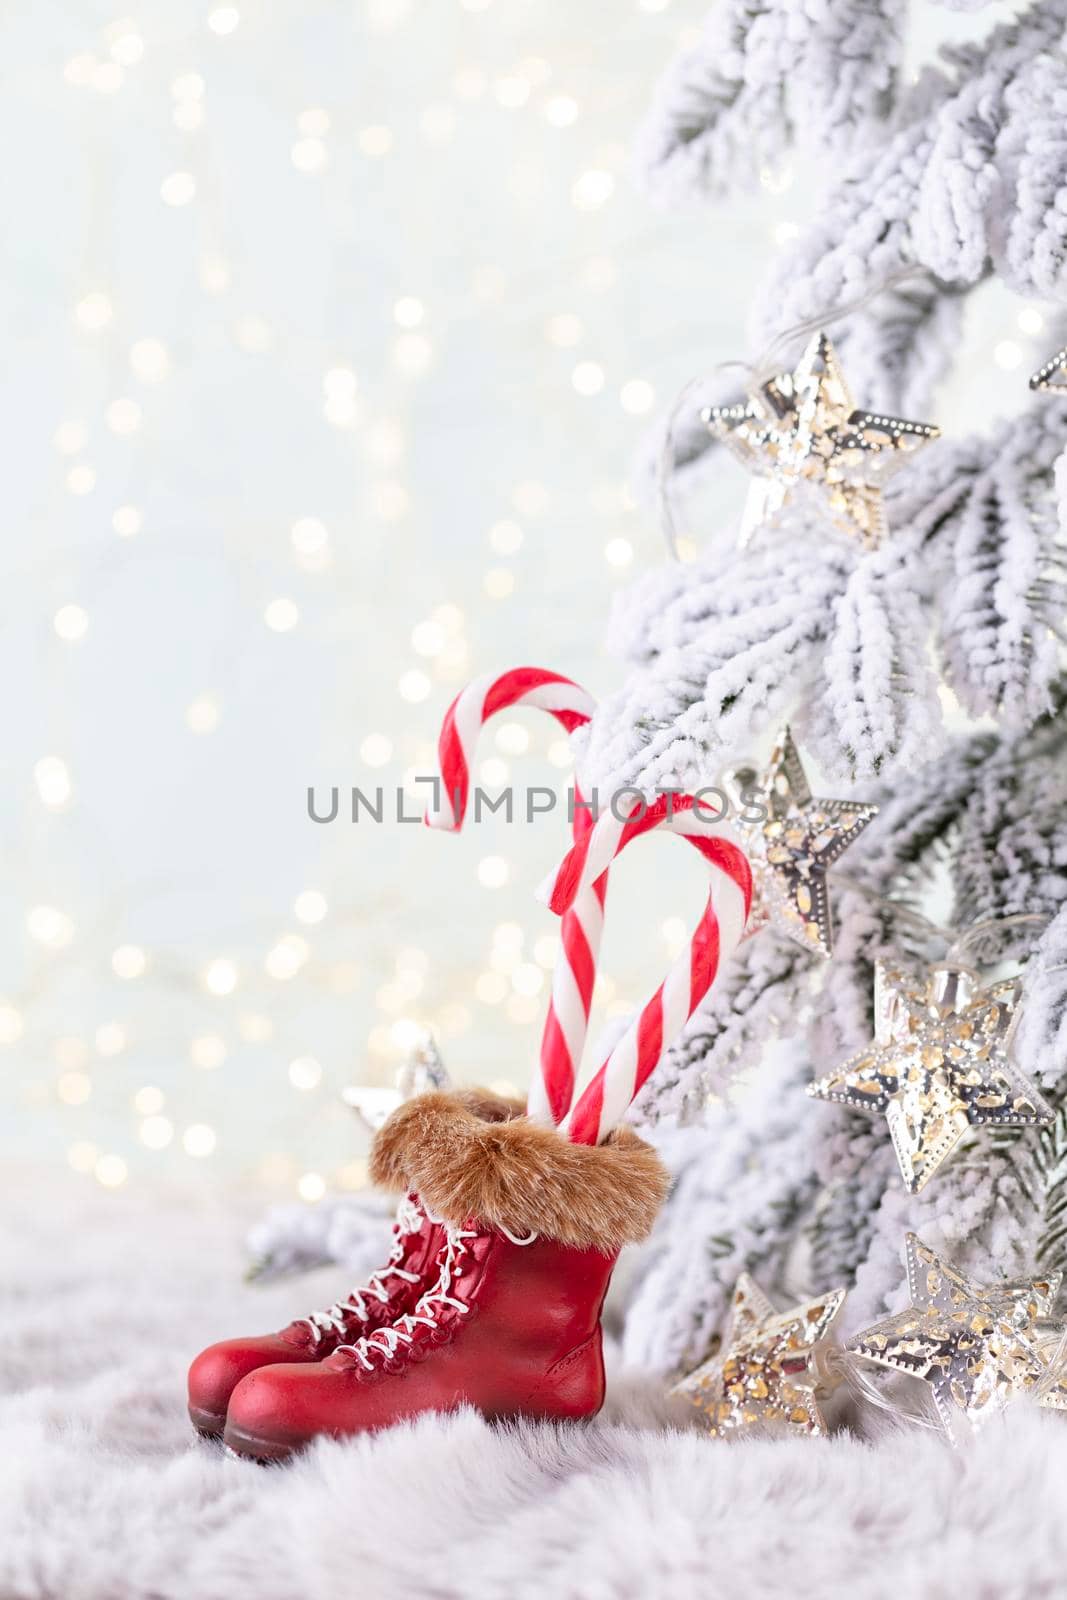 Christmas candy cane heart, bokeh background. by gitusik